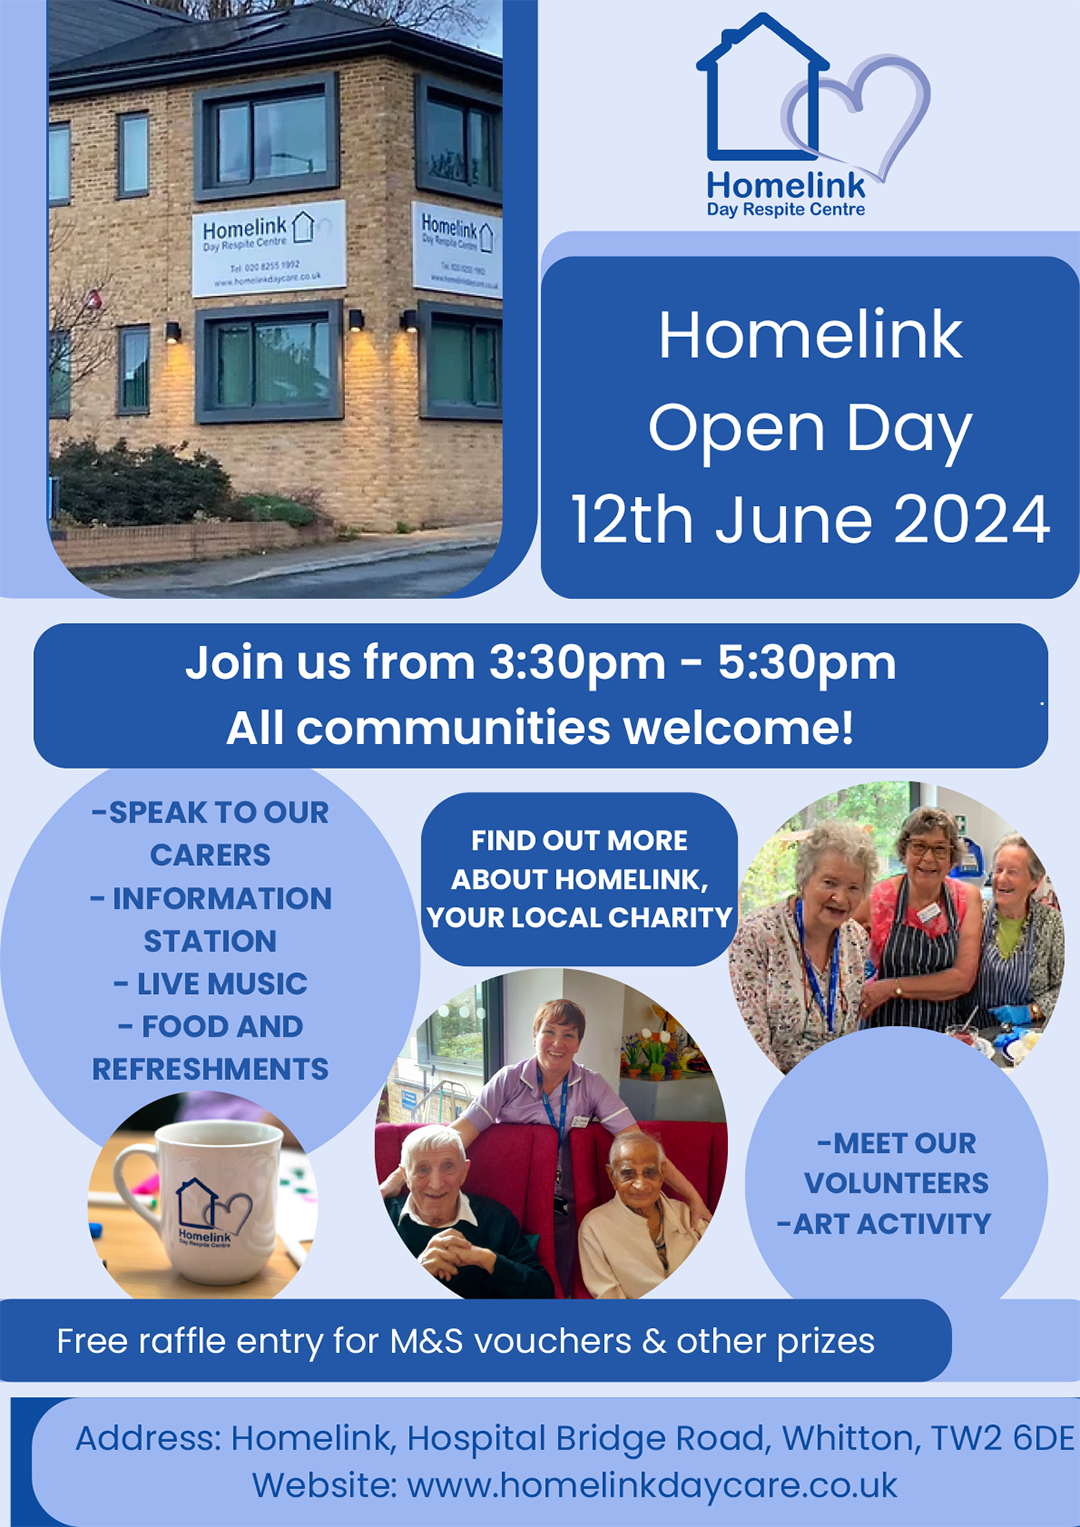 Homelink Open Day flyer. Event on Wednesday, 12th June 2024, from 3:30 PM to 5:30 PM